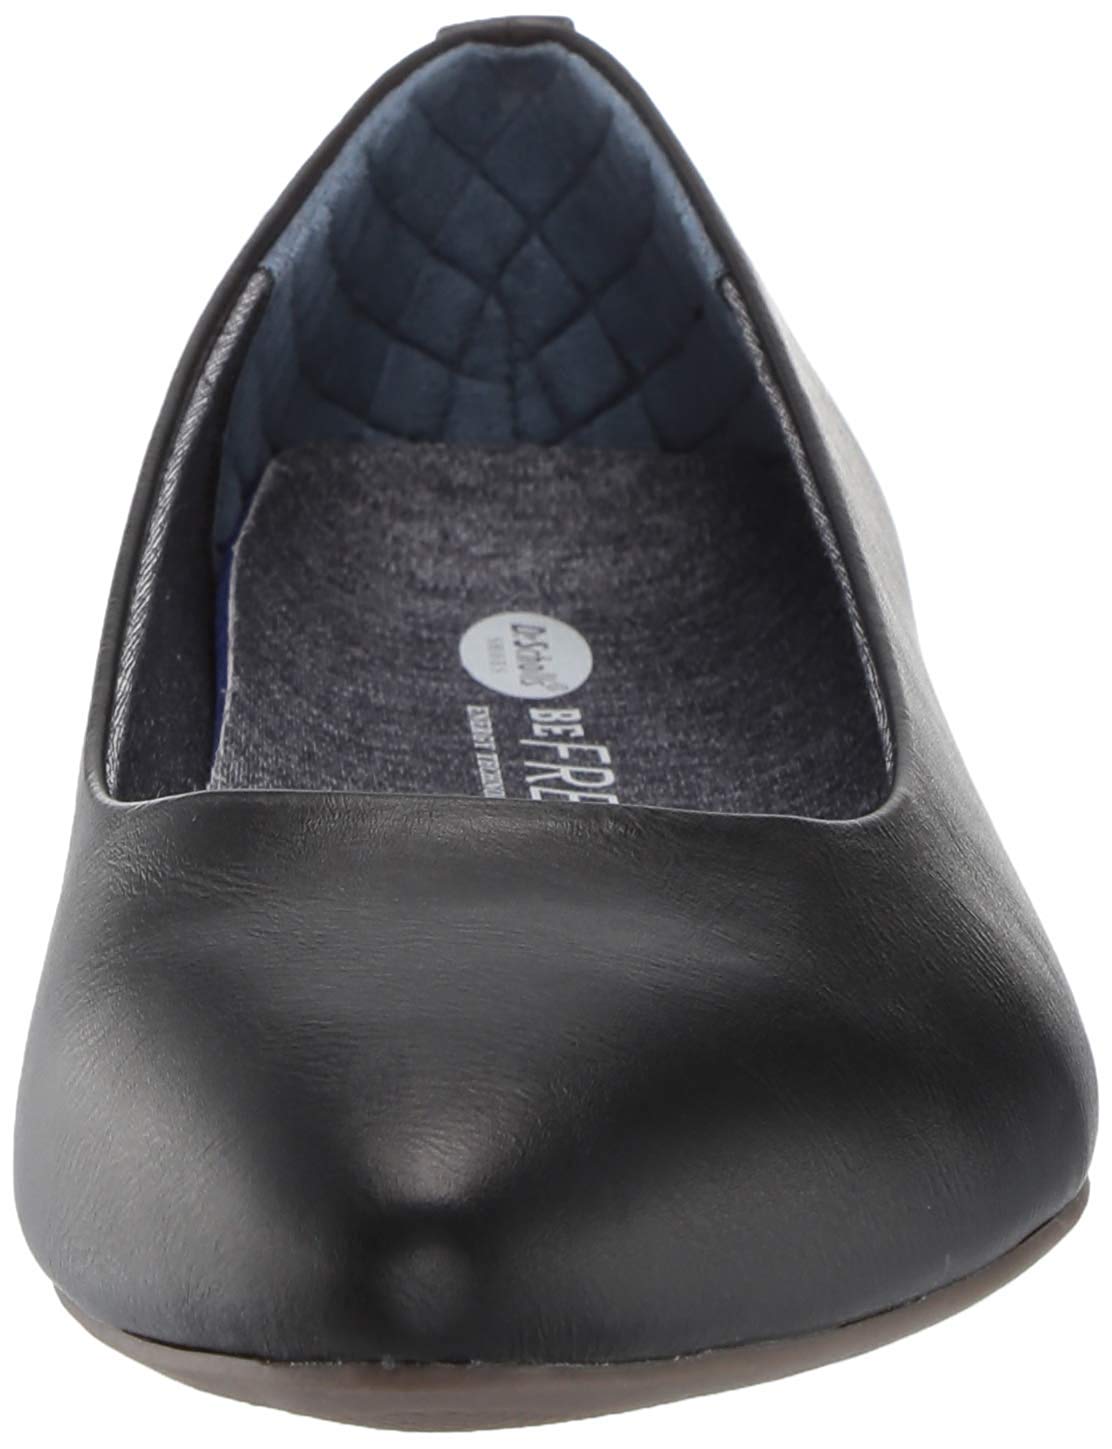 Dr. Scholl's Womens Ashton Fabric Closed Toe Slide, Black Smooth, Size ...